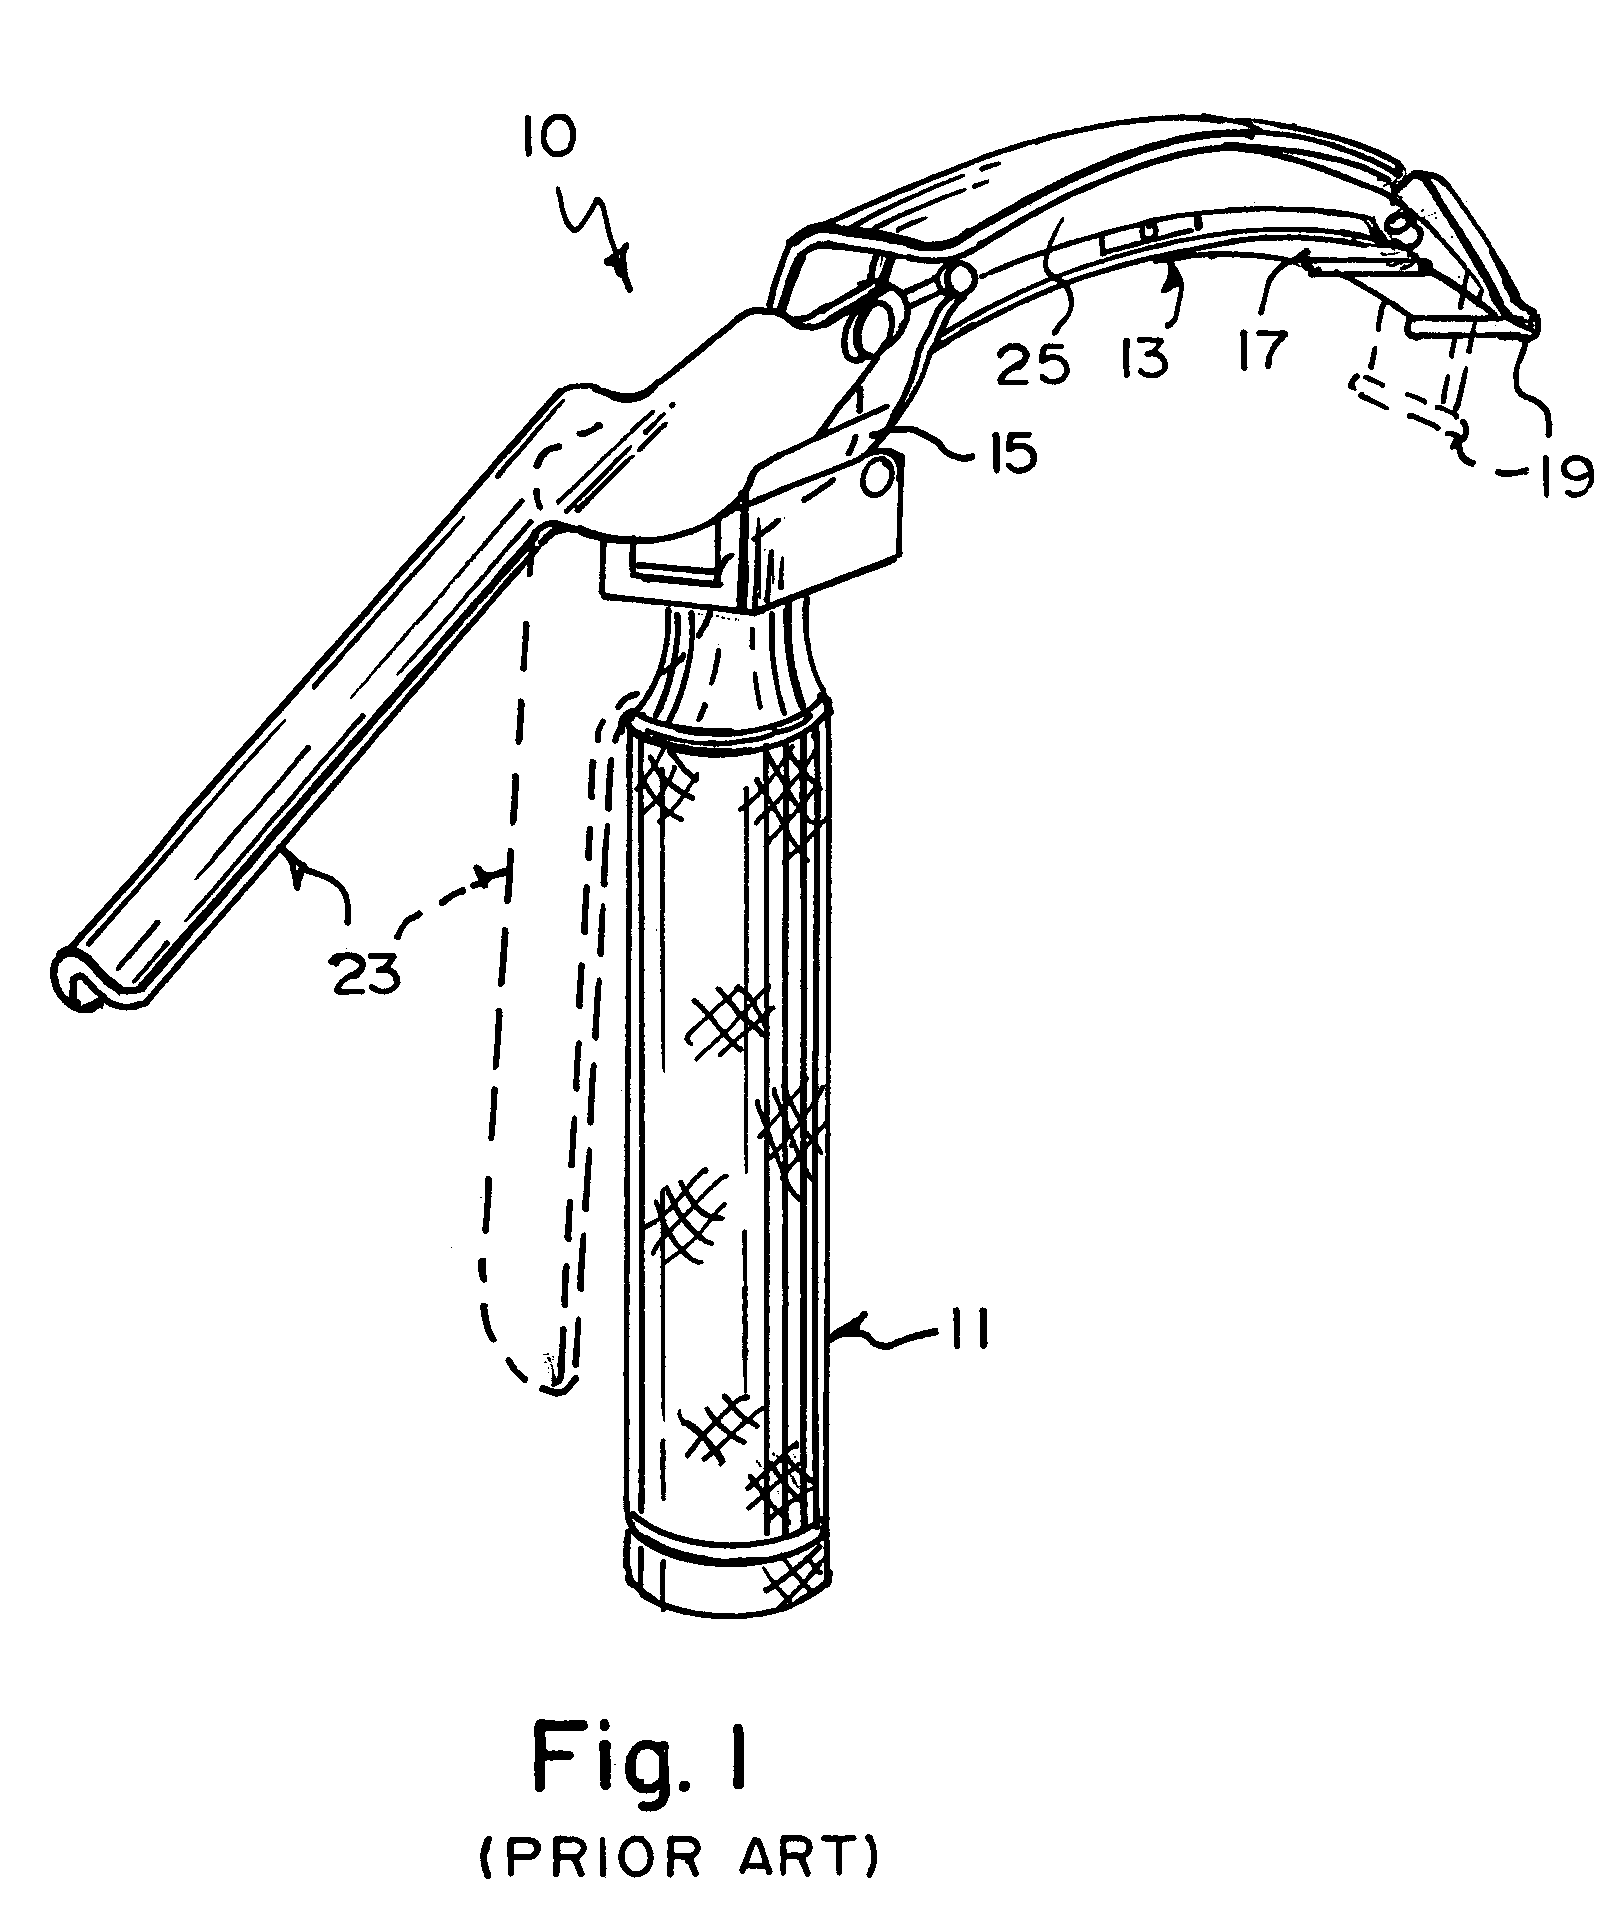 Laryngoscope for simultaneously facilitating the illuminating of a throat pathway and inserting an intubation tube